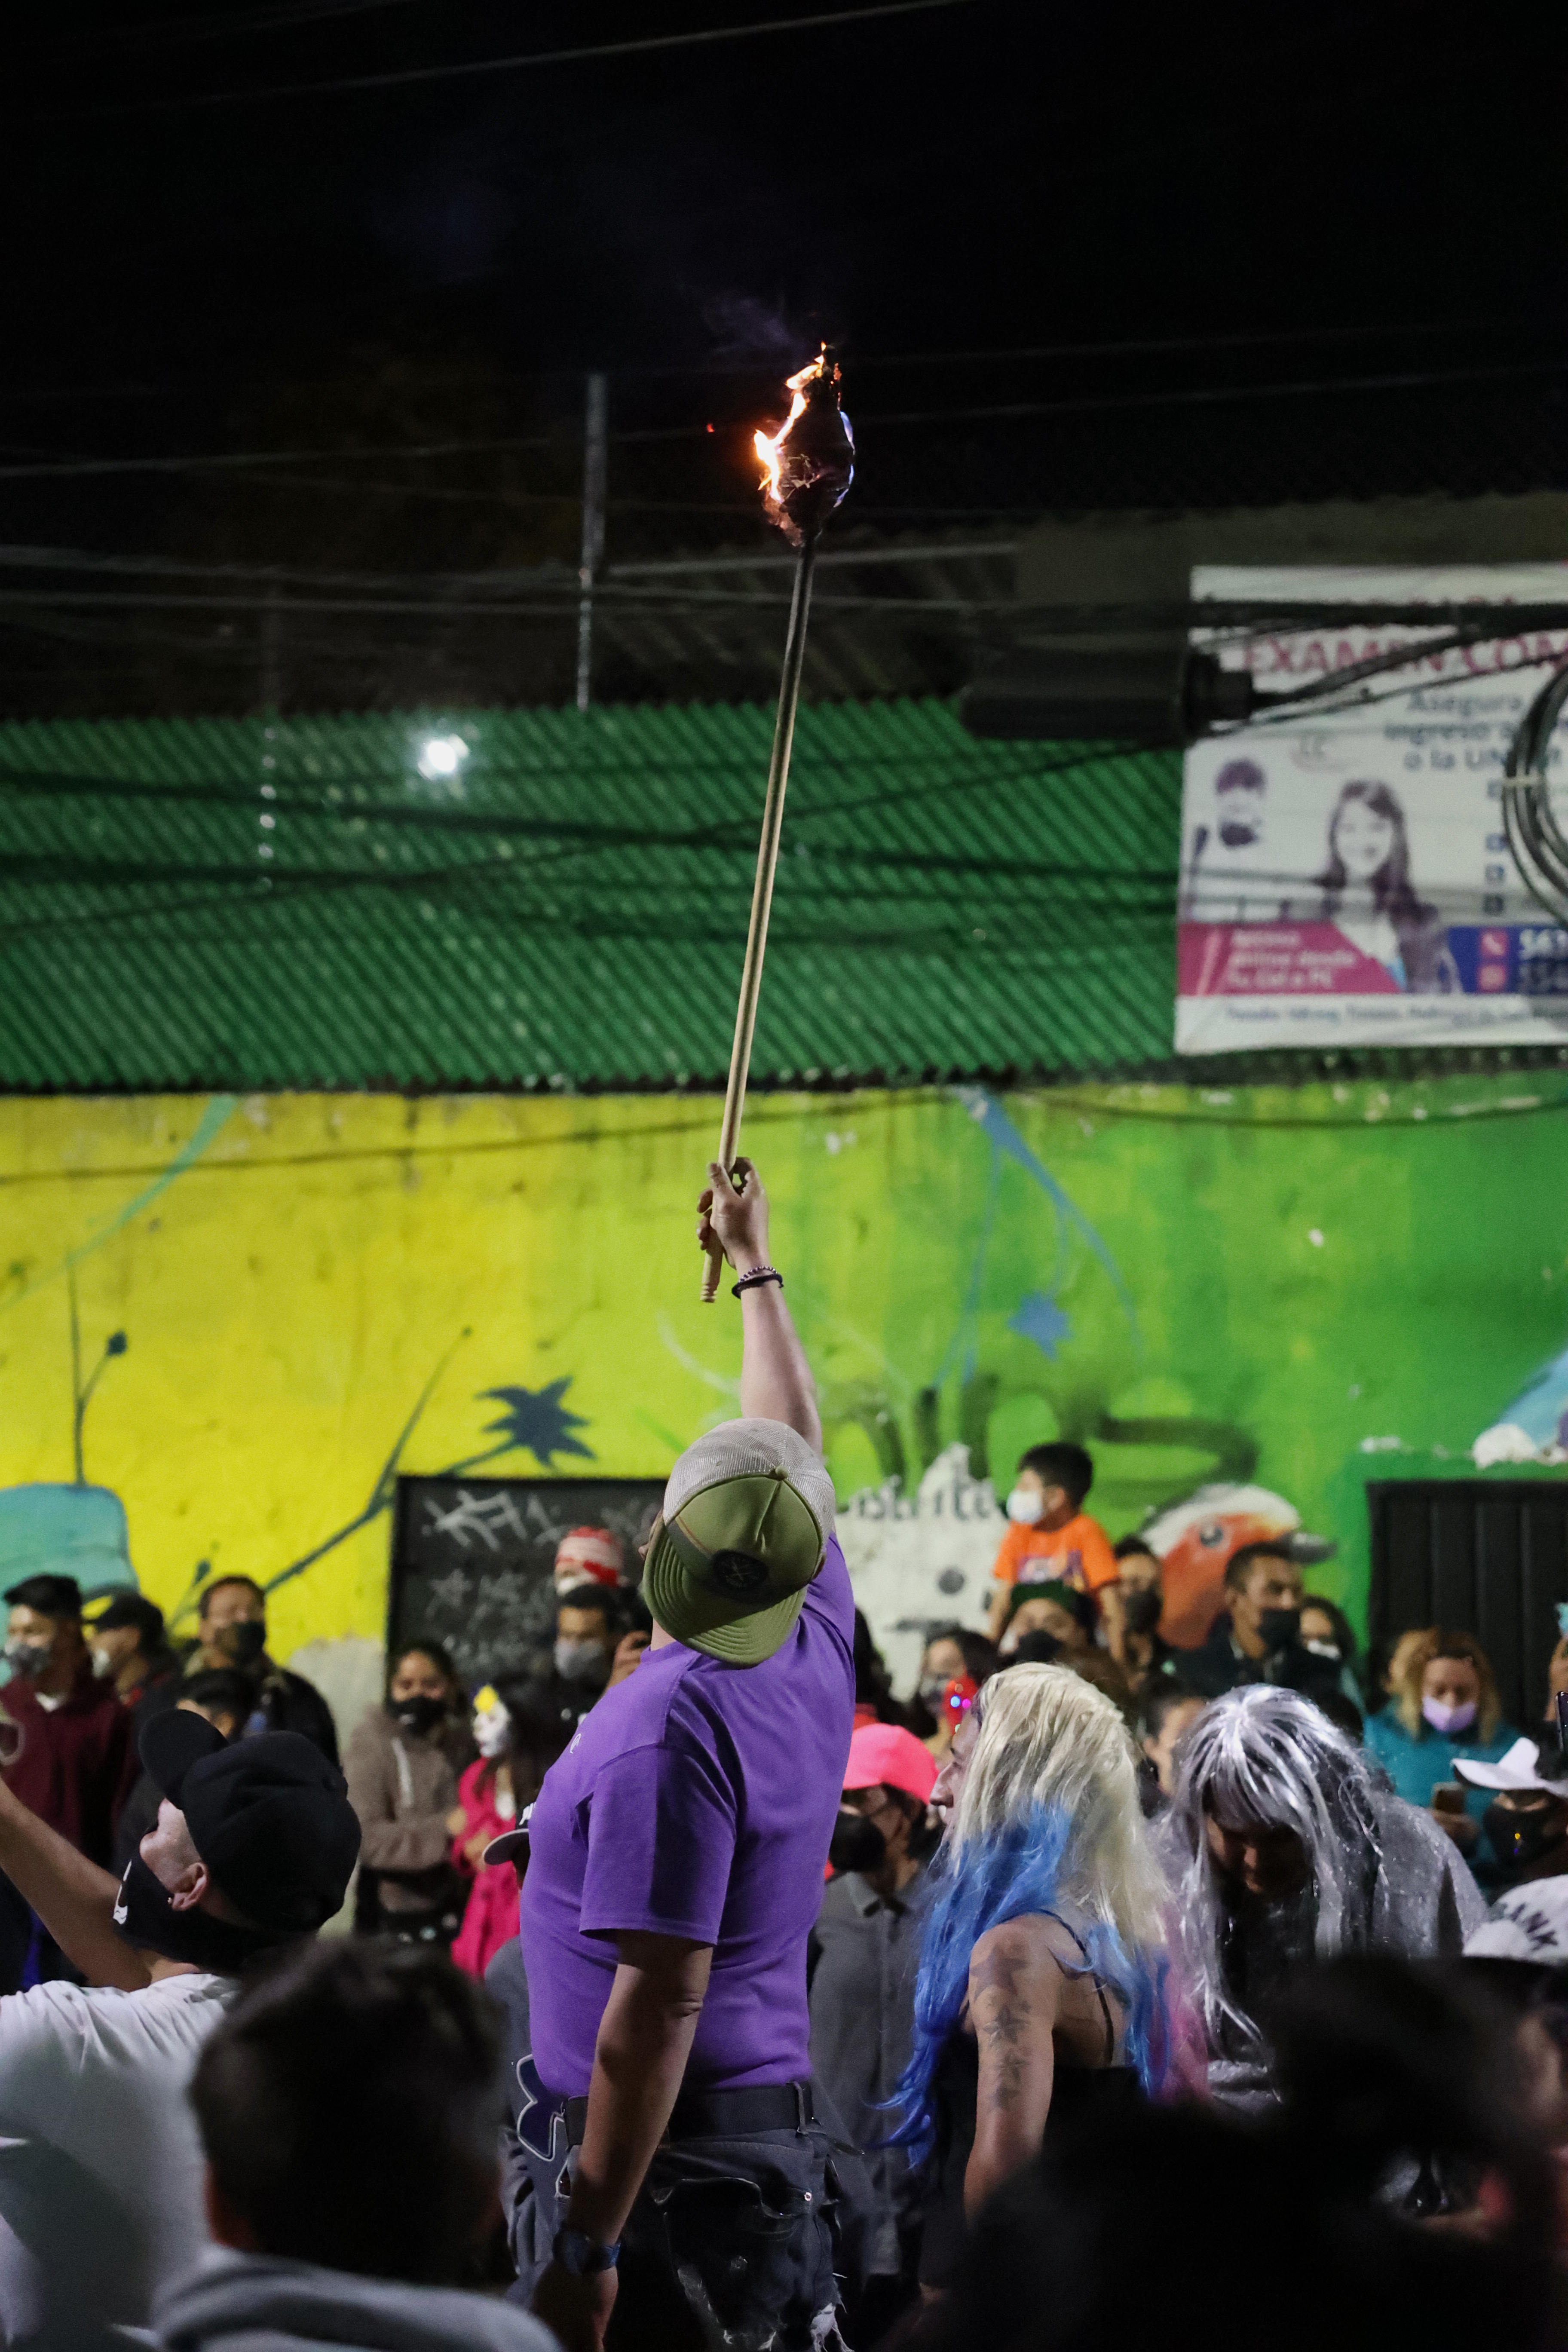 Leading the way for a Día de Muertos parade, a man holds up a torch in Mexico City's Magdalena Contreras delegation on Nov. 2, 2021.